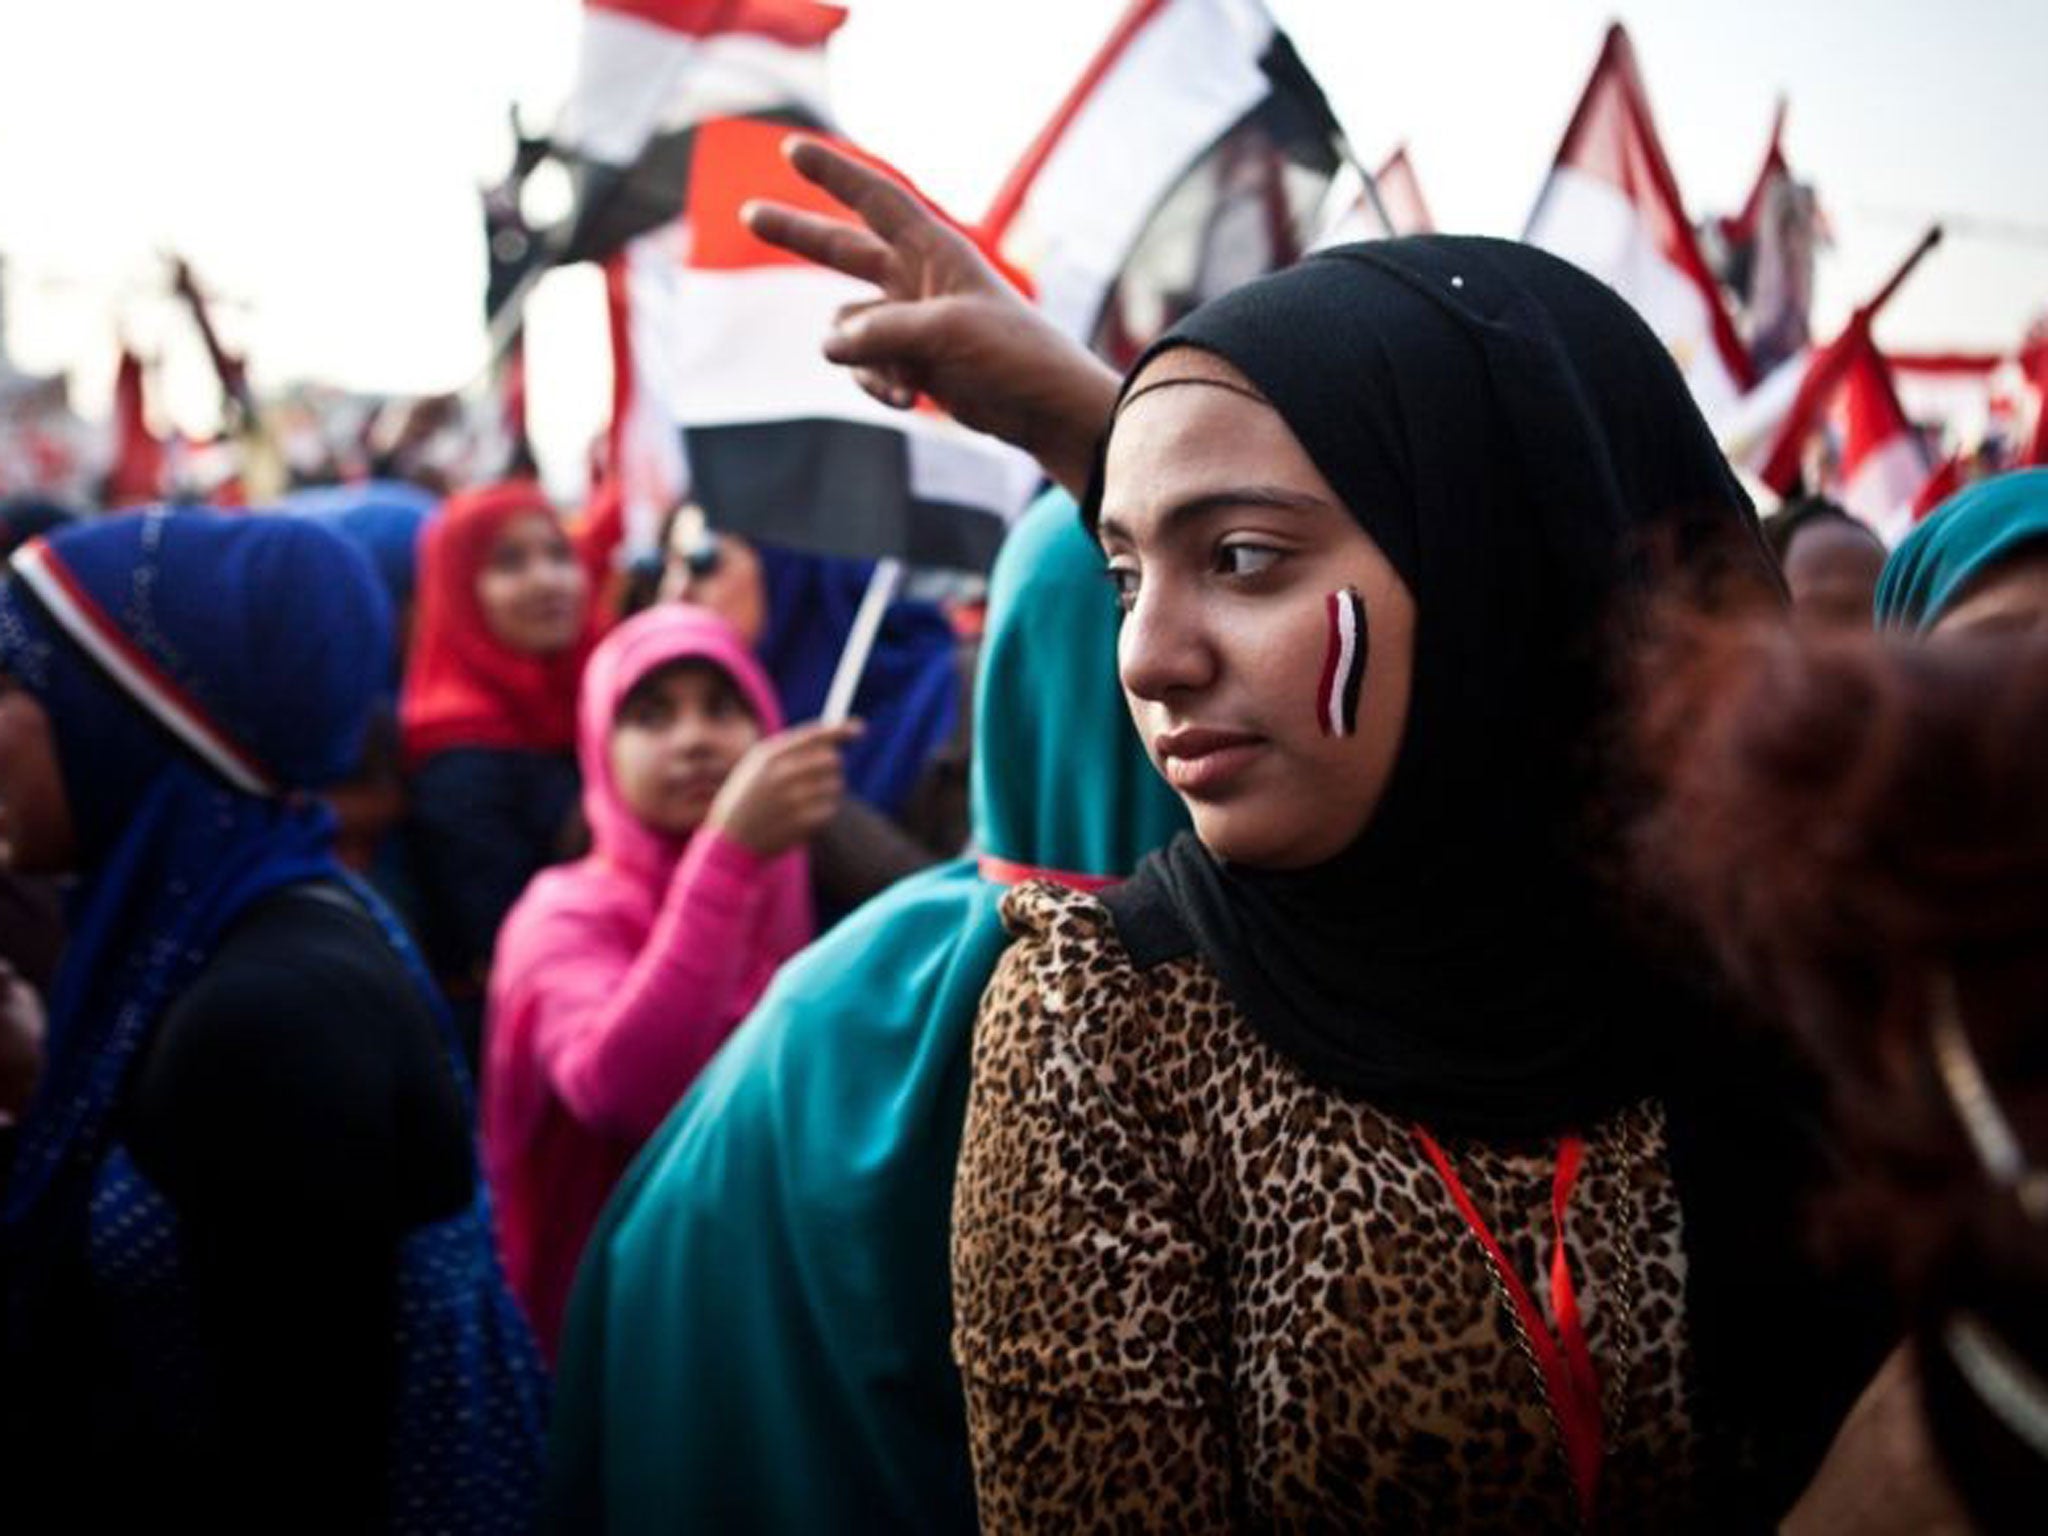 A girl looks on as around her thousands wave Egypt's national flag in Tahrir Square